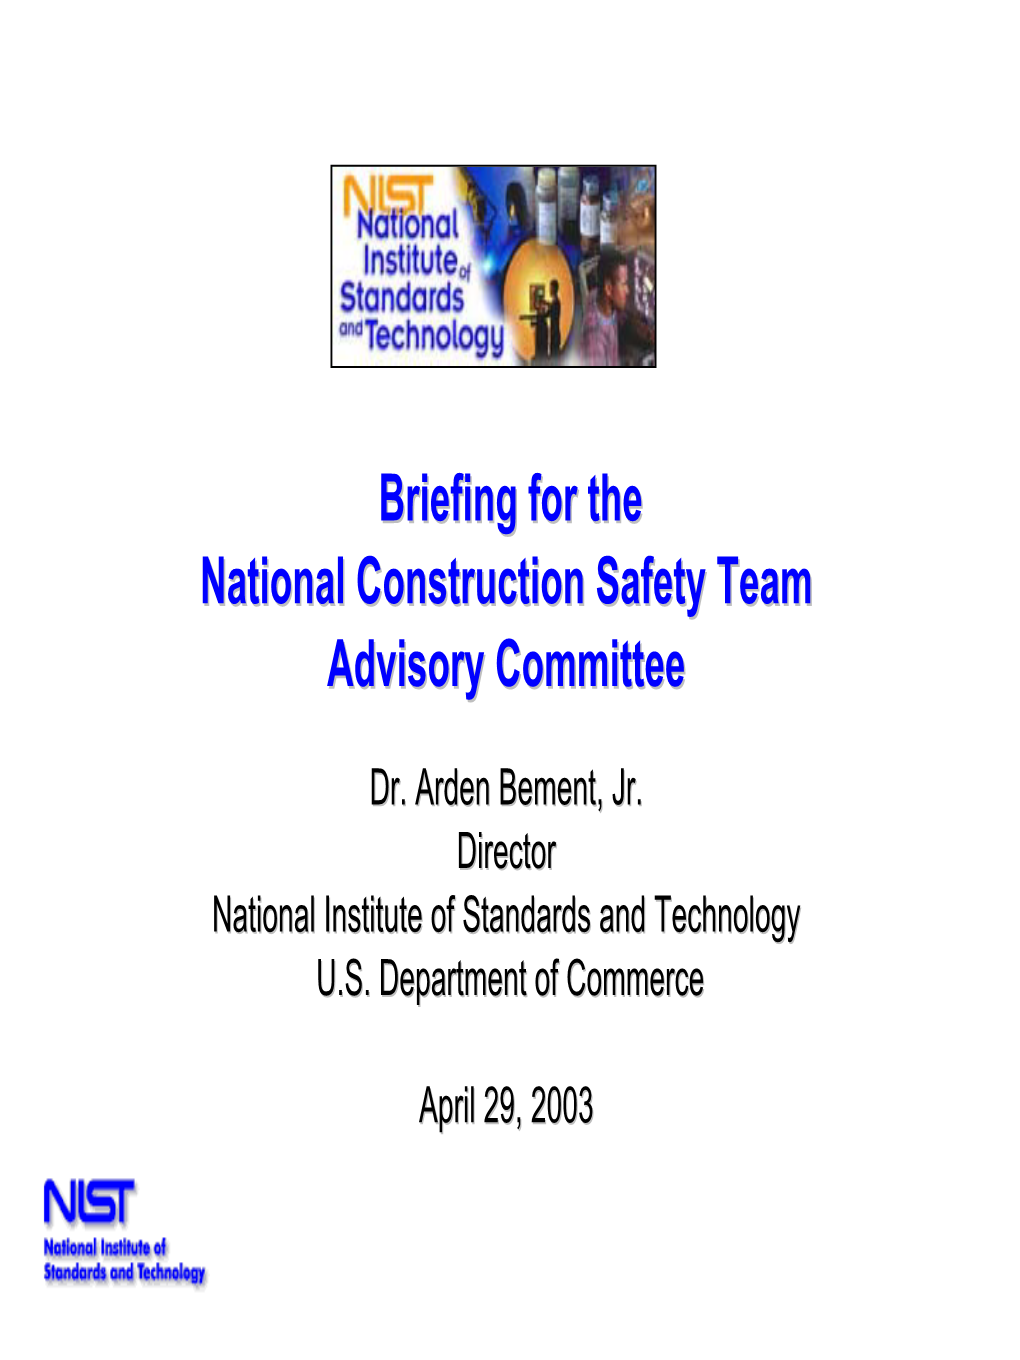 Briefing for the National Construction Safety Team Advisory Committee